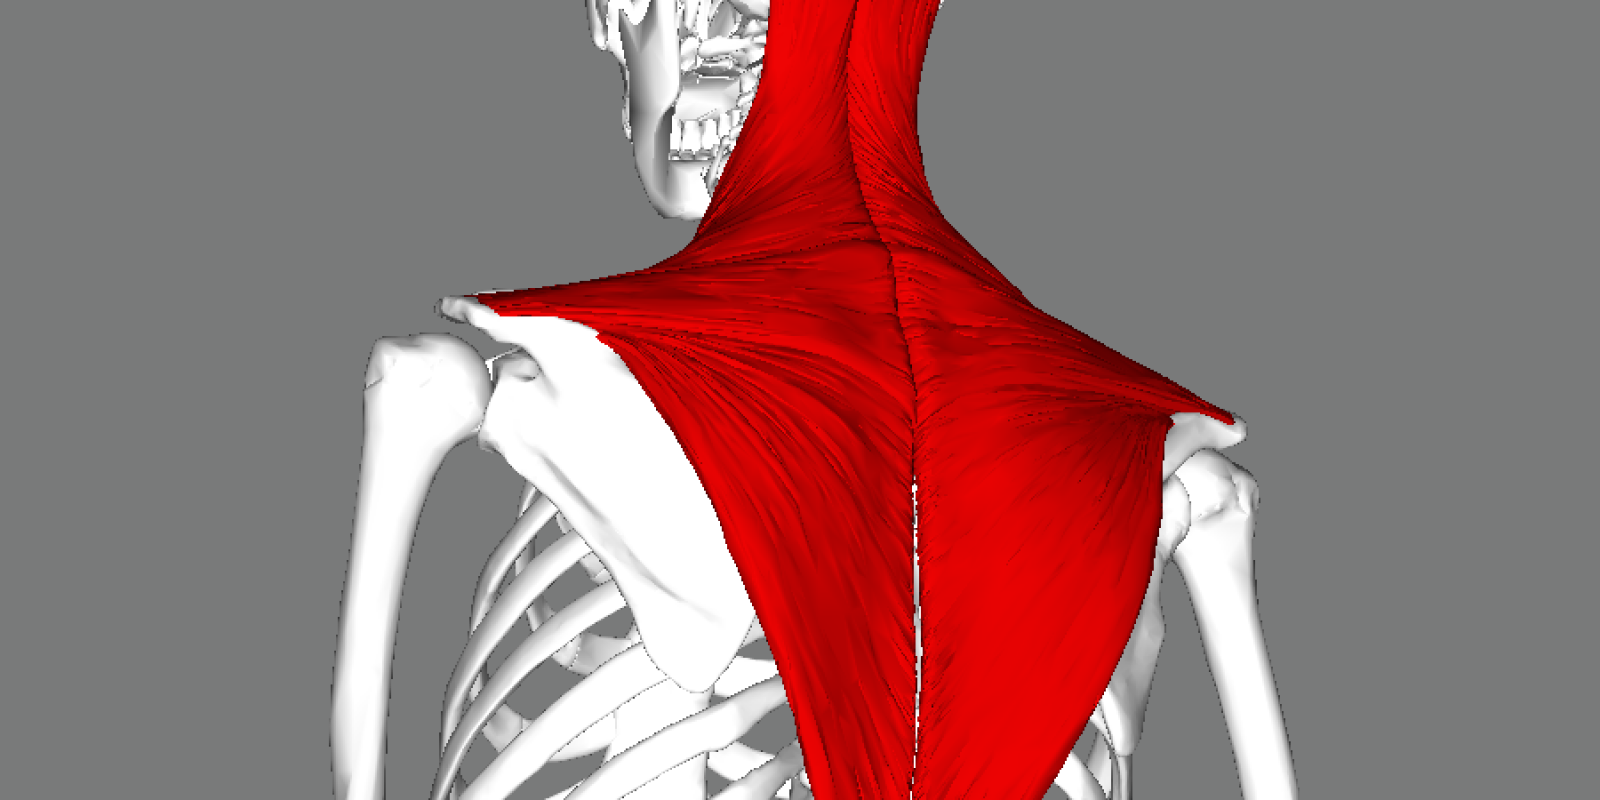 The trapezius is a large, flat kite-shaped muscle which spans the width of the upper back. Image via BodyParts3D/Anatomography